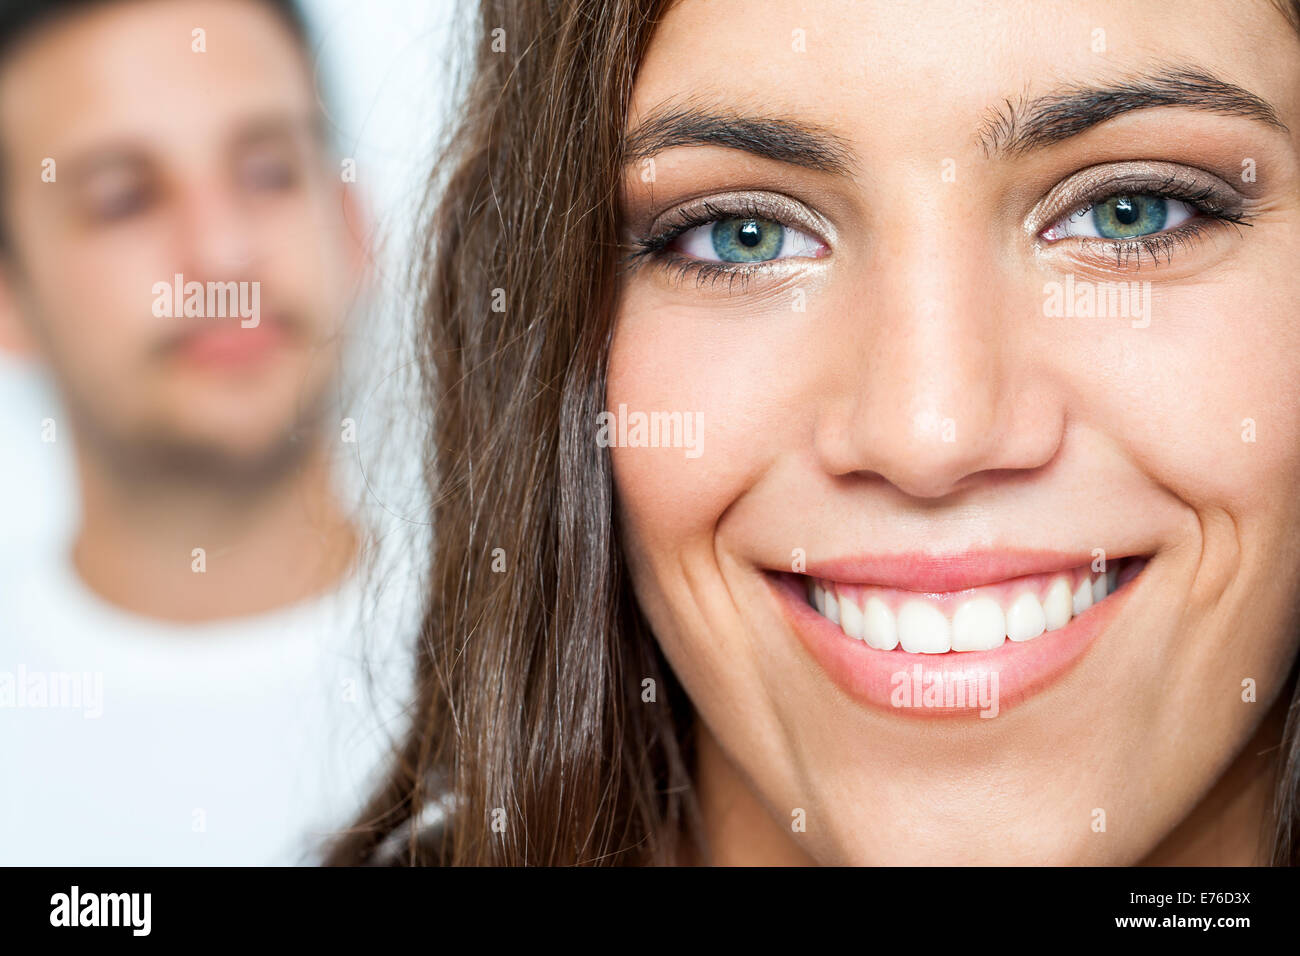 Close up Facial portrait of attractive girl with toothy smile and boy in background. Stock Photo